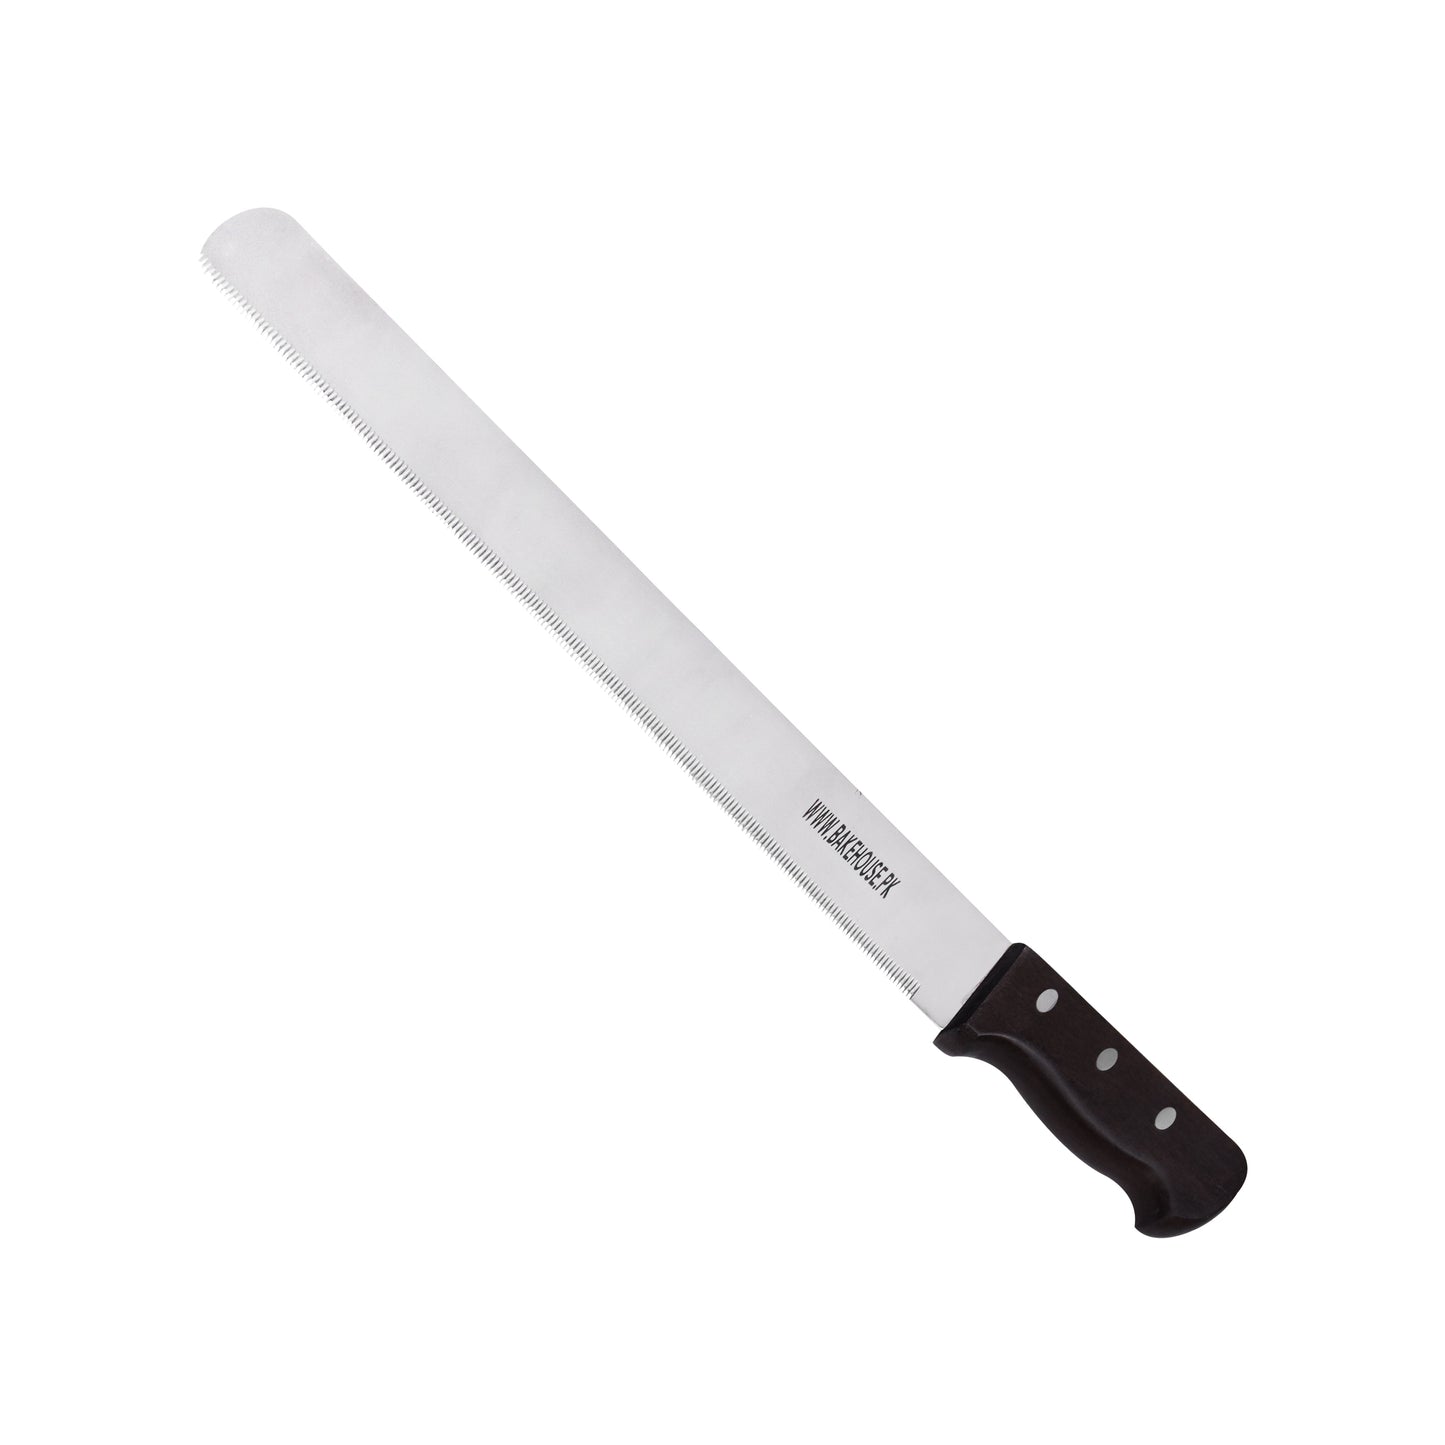 Bake House Cake Cutting Knife Steel With Wood Handle 14 Inch